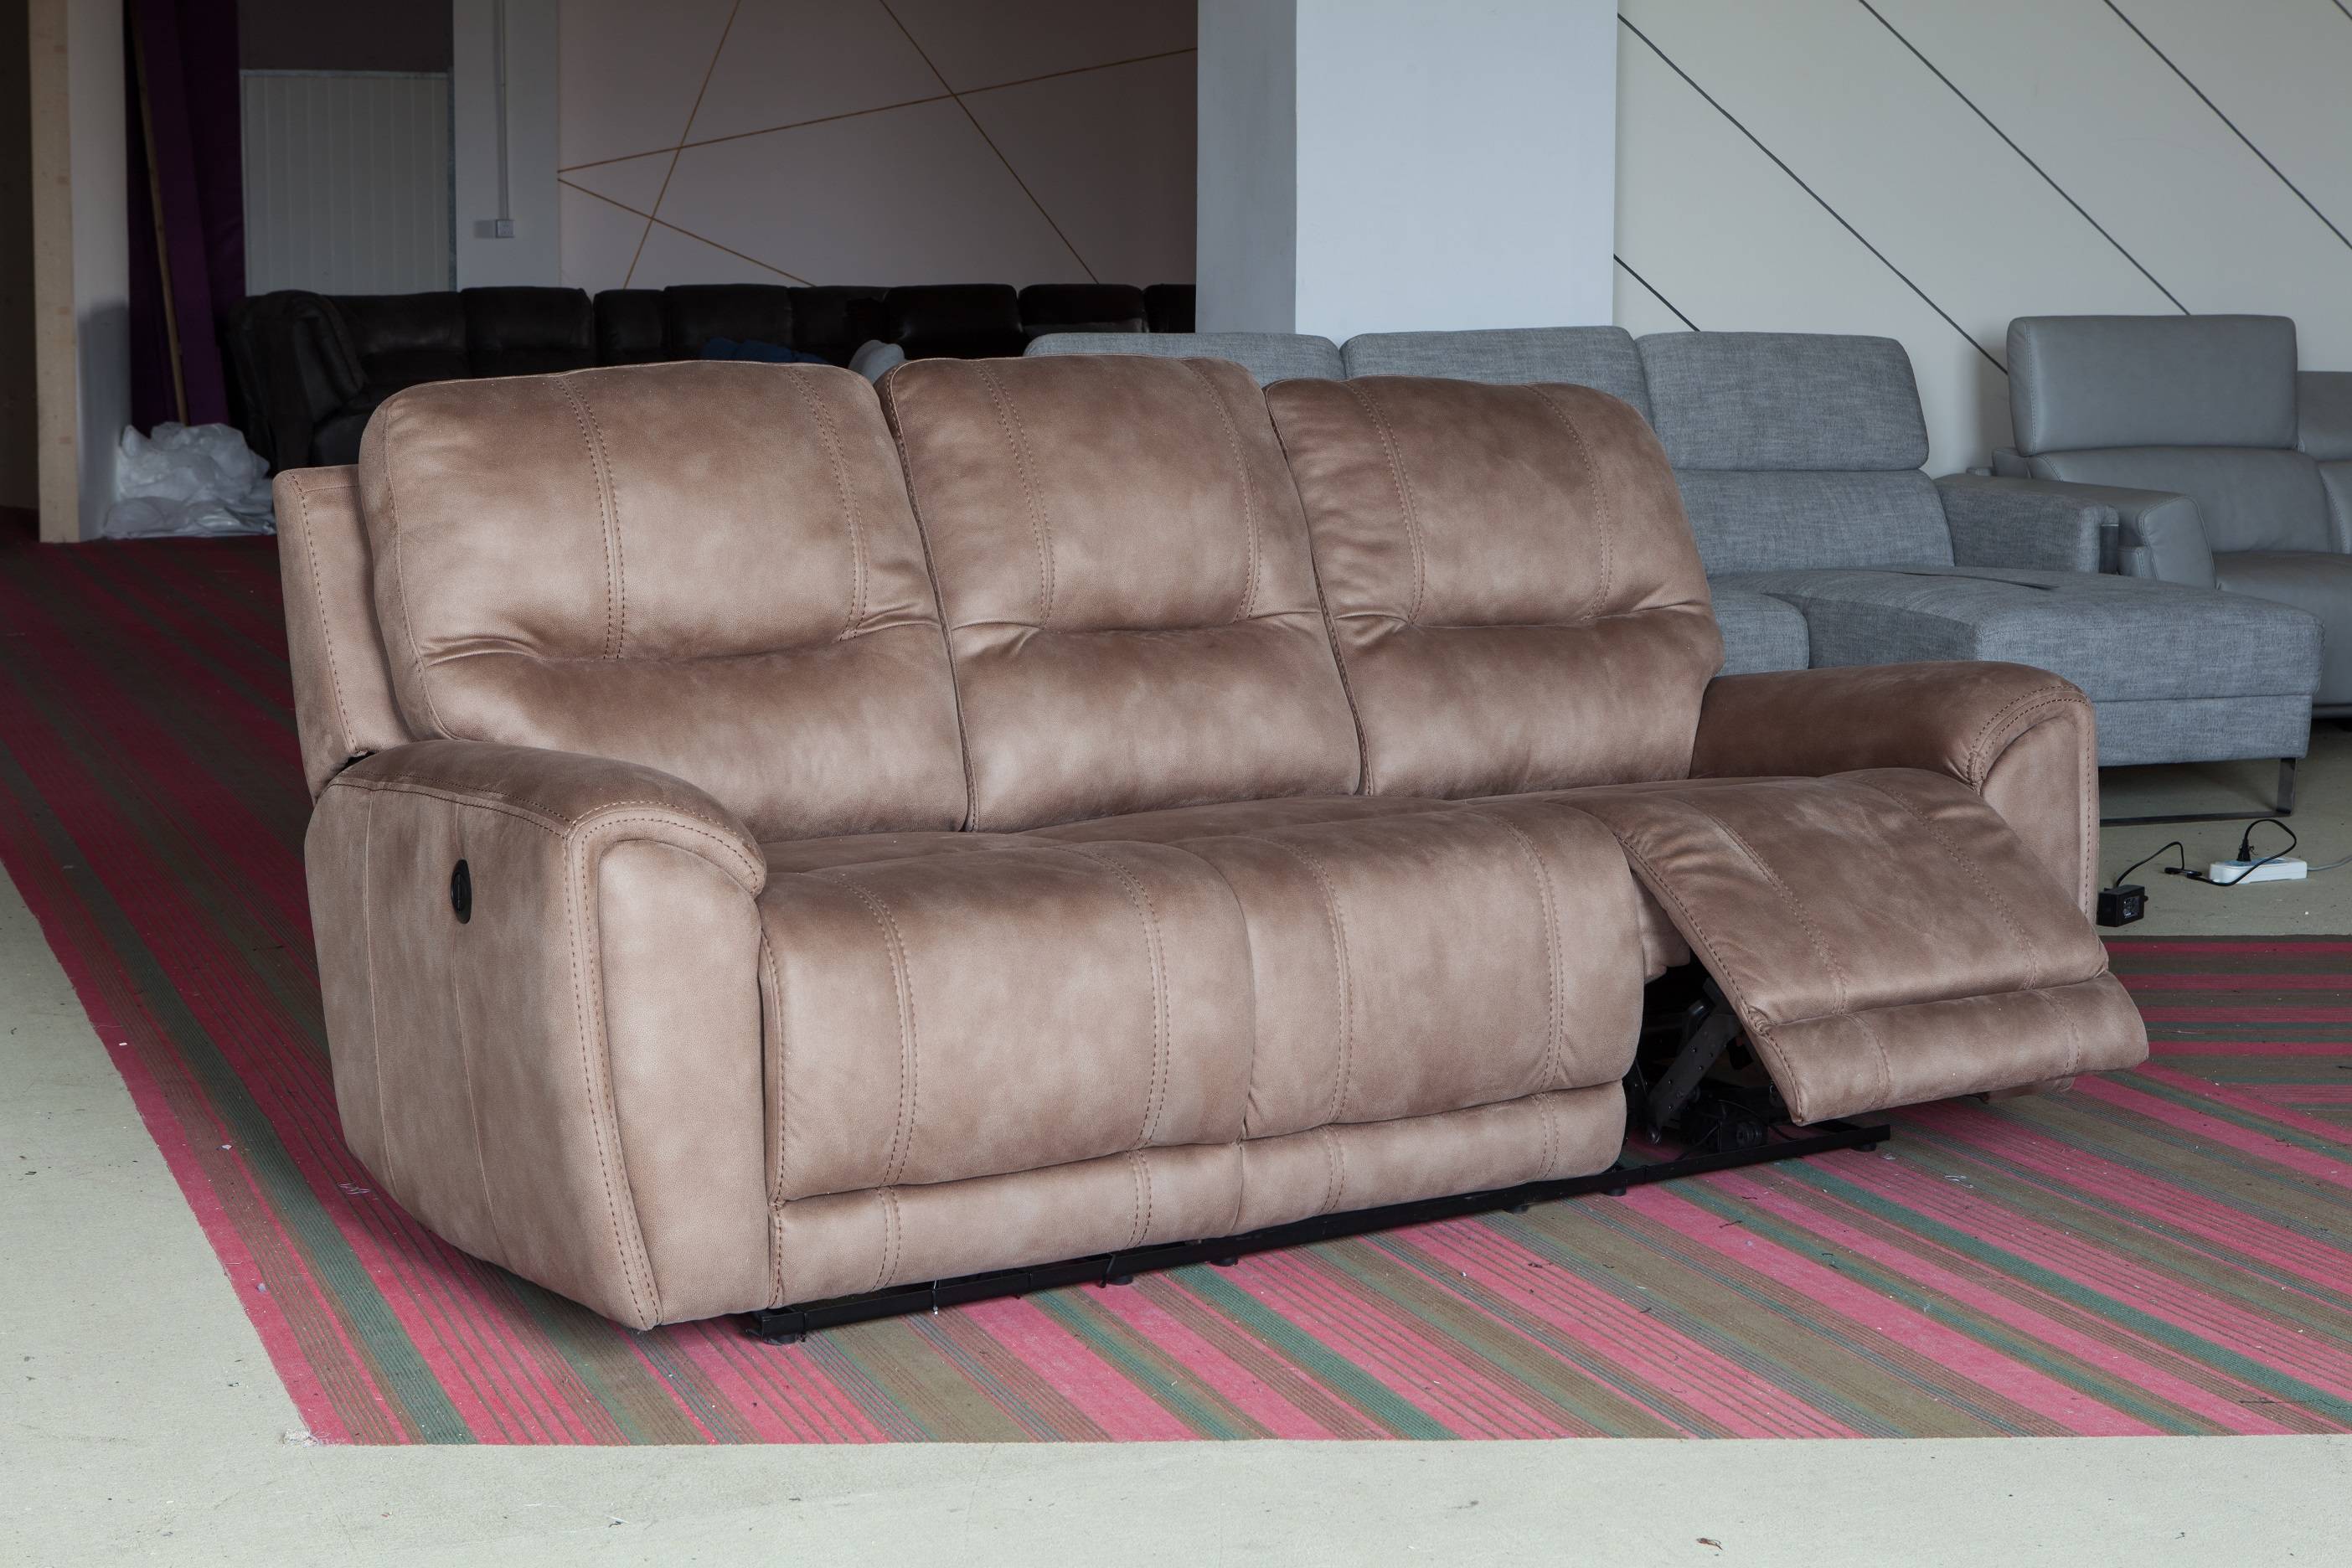 China Good Quality Corner Furniture Leather Recliner Sofa Living Room Furniture 3 2 1 Leather Power Recliner Sofa Chuan Yang Factory And Manufacturers Chuan Yang